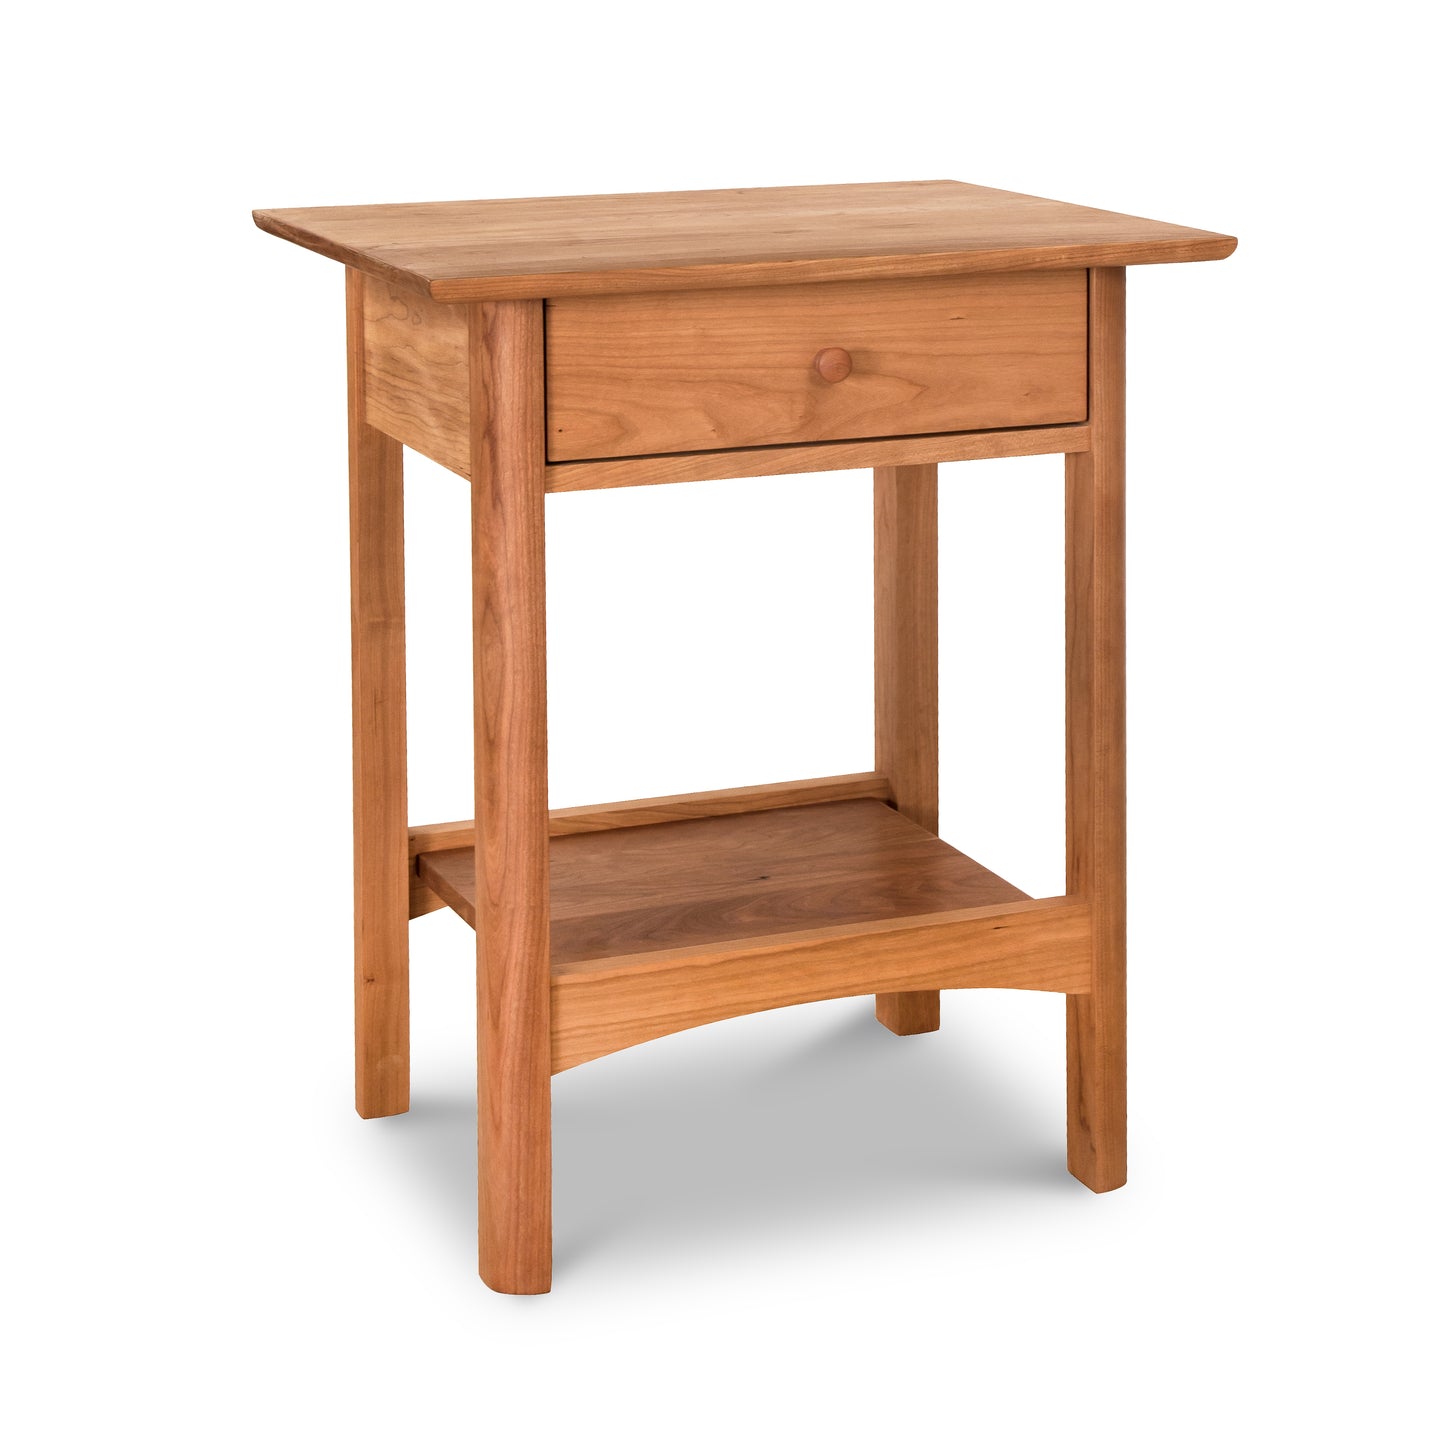 A solid wood bedside table with a shelf on top, the Vermont Furniture Designs Heartwood Shaker 1-Drawer Open Shelf Nightstand.